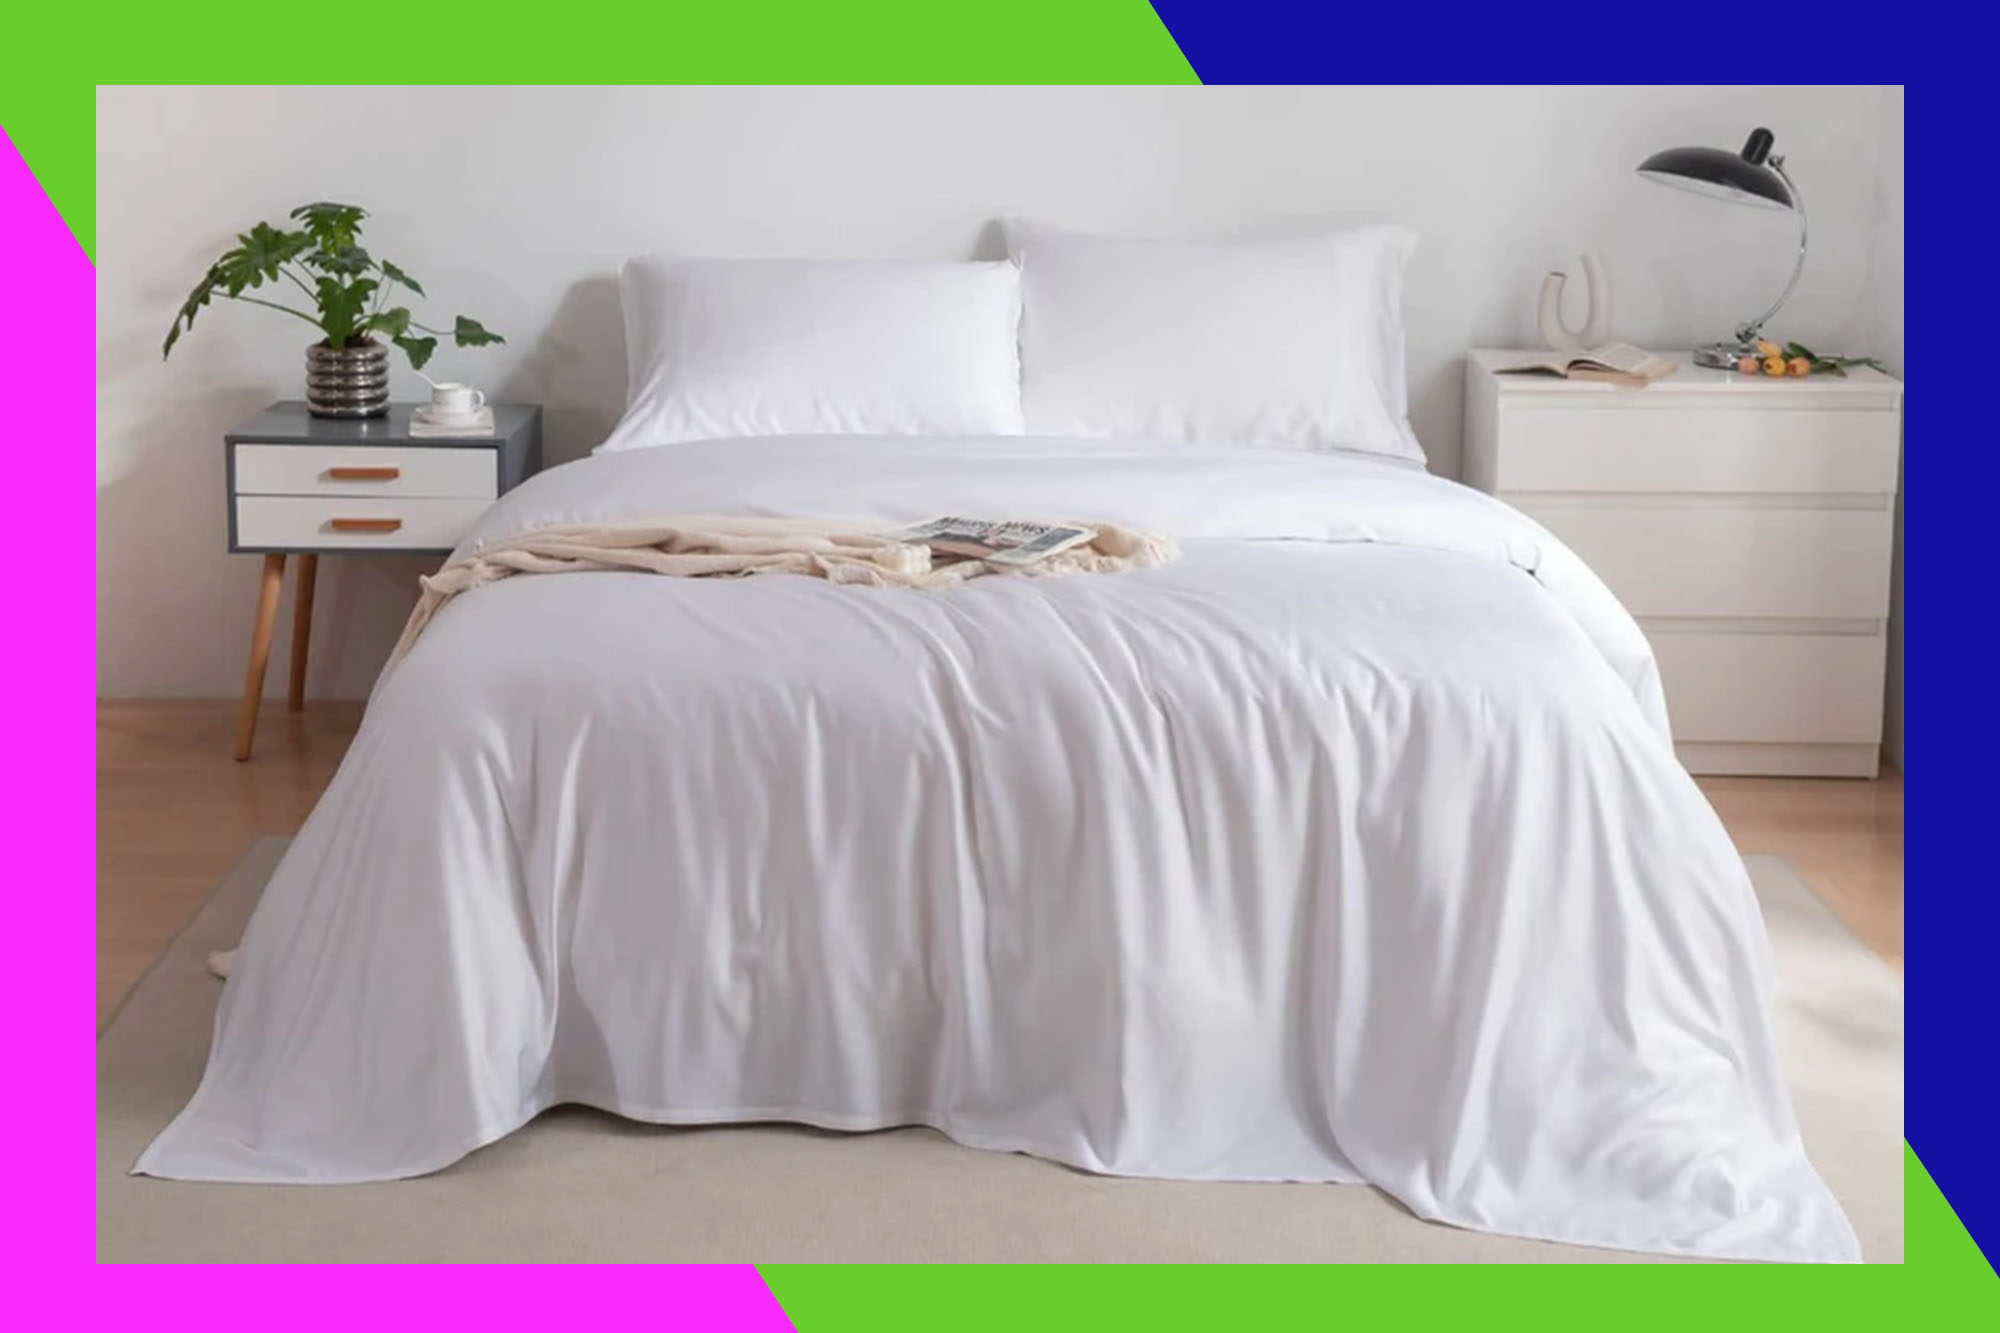 A bed with white sheets and pillows